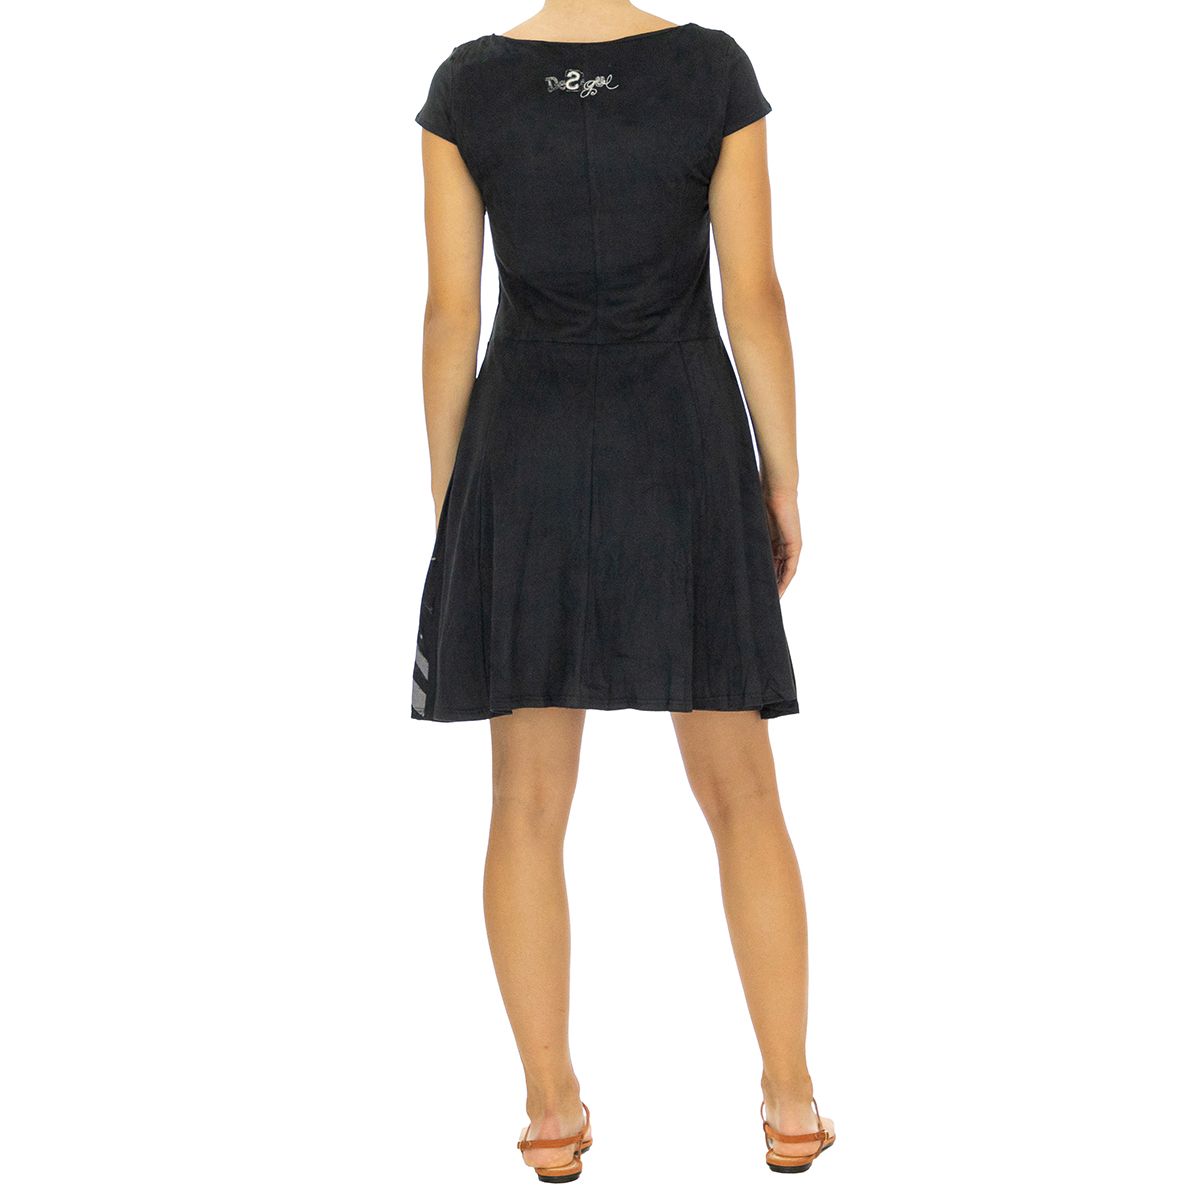 Desigual 36V2129-2000-M Easy to wear and to pair with, this black dress is the perfect clothing piece for daywear.